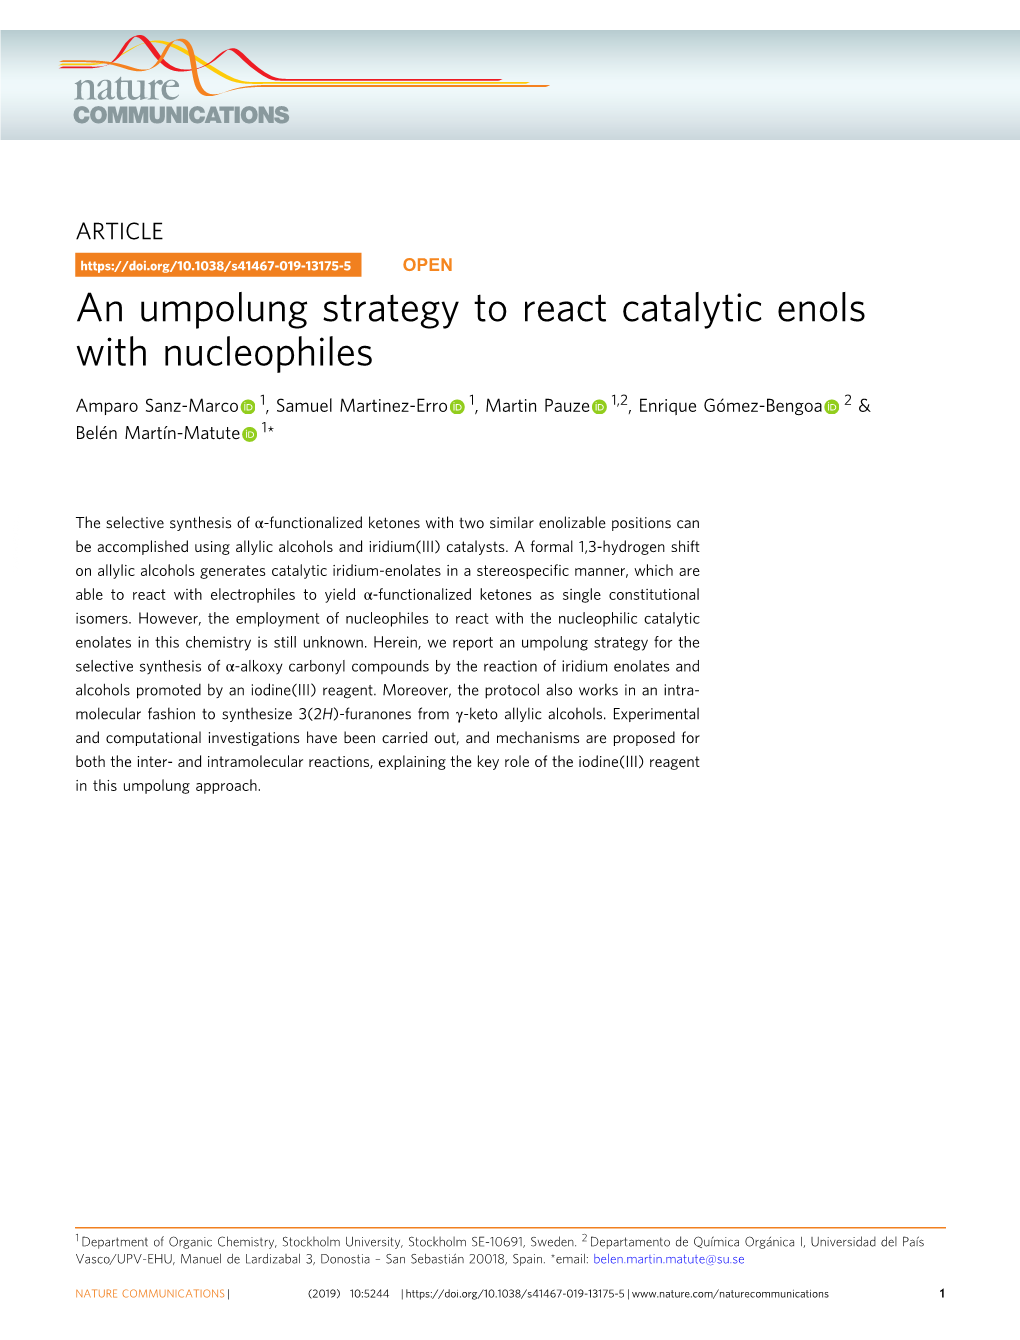 An Umpolung Strategy to React Catalytic Enols with Nucleophiles